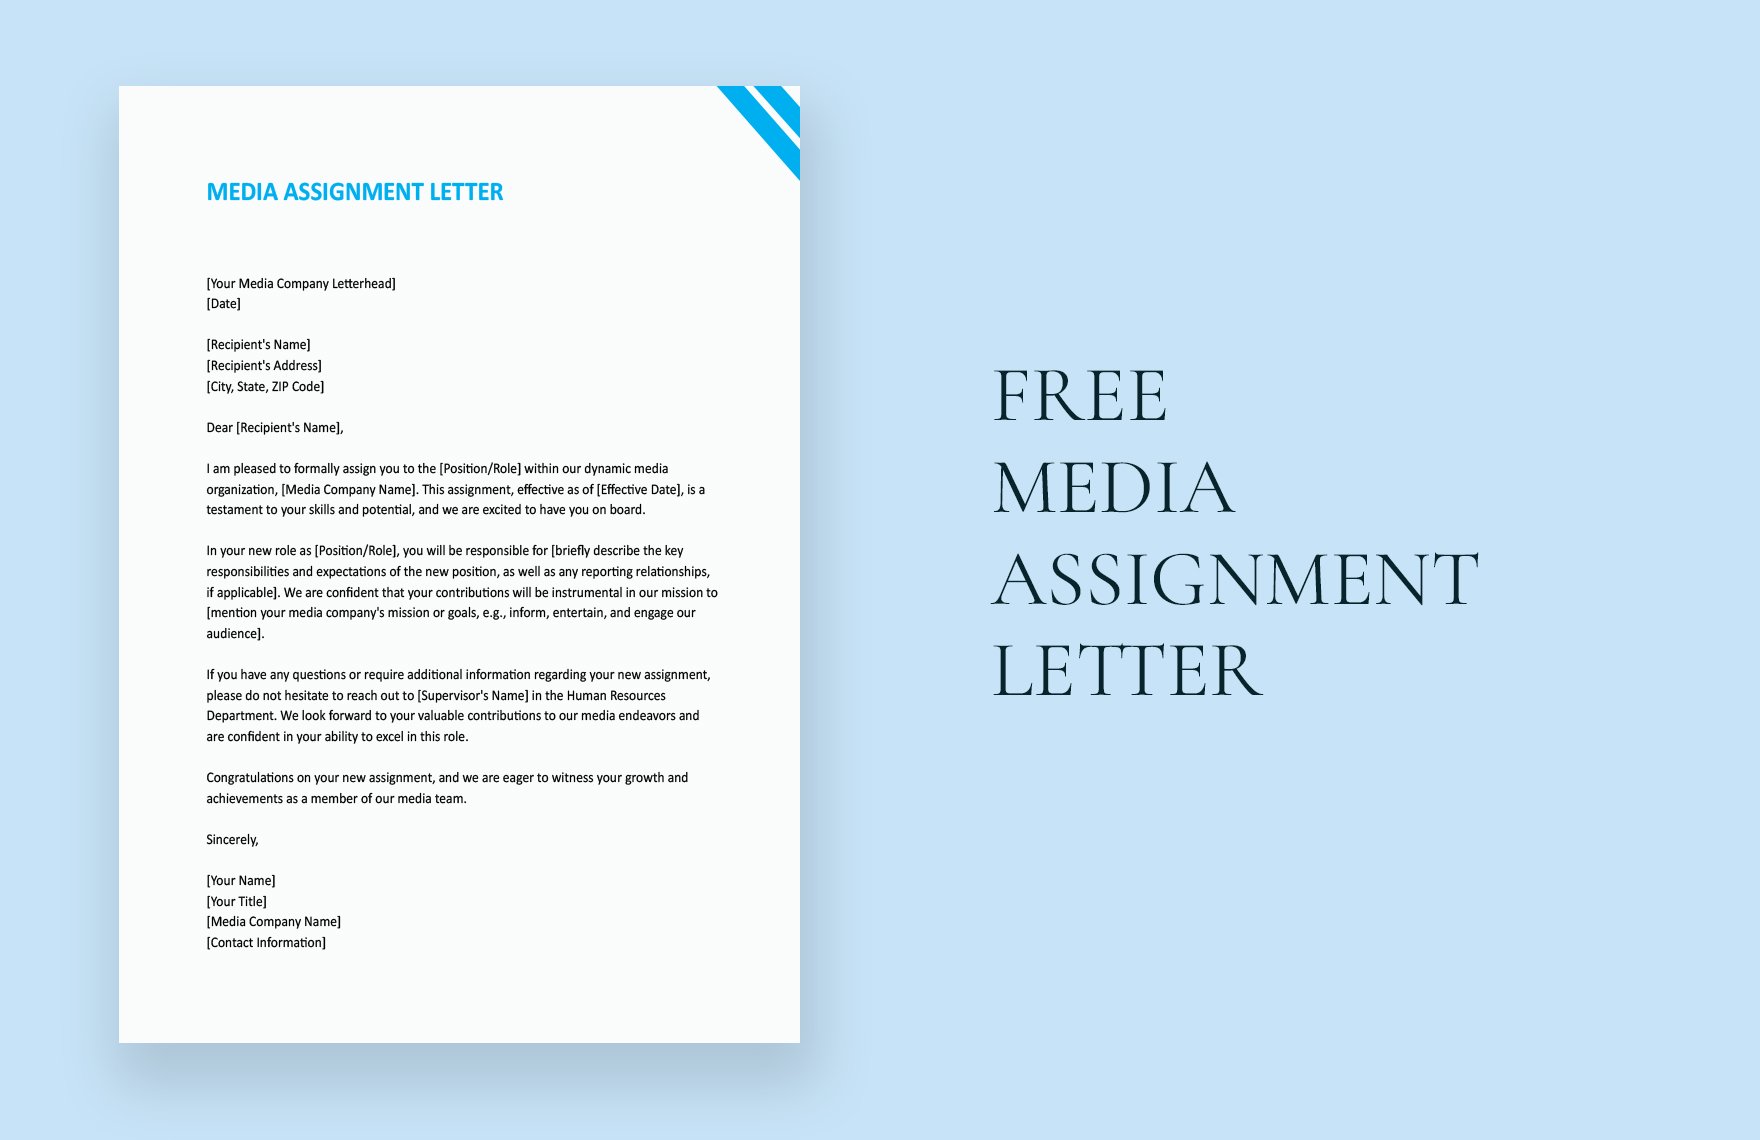 Media Assignment Letter in Word, Google Docs